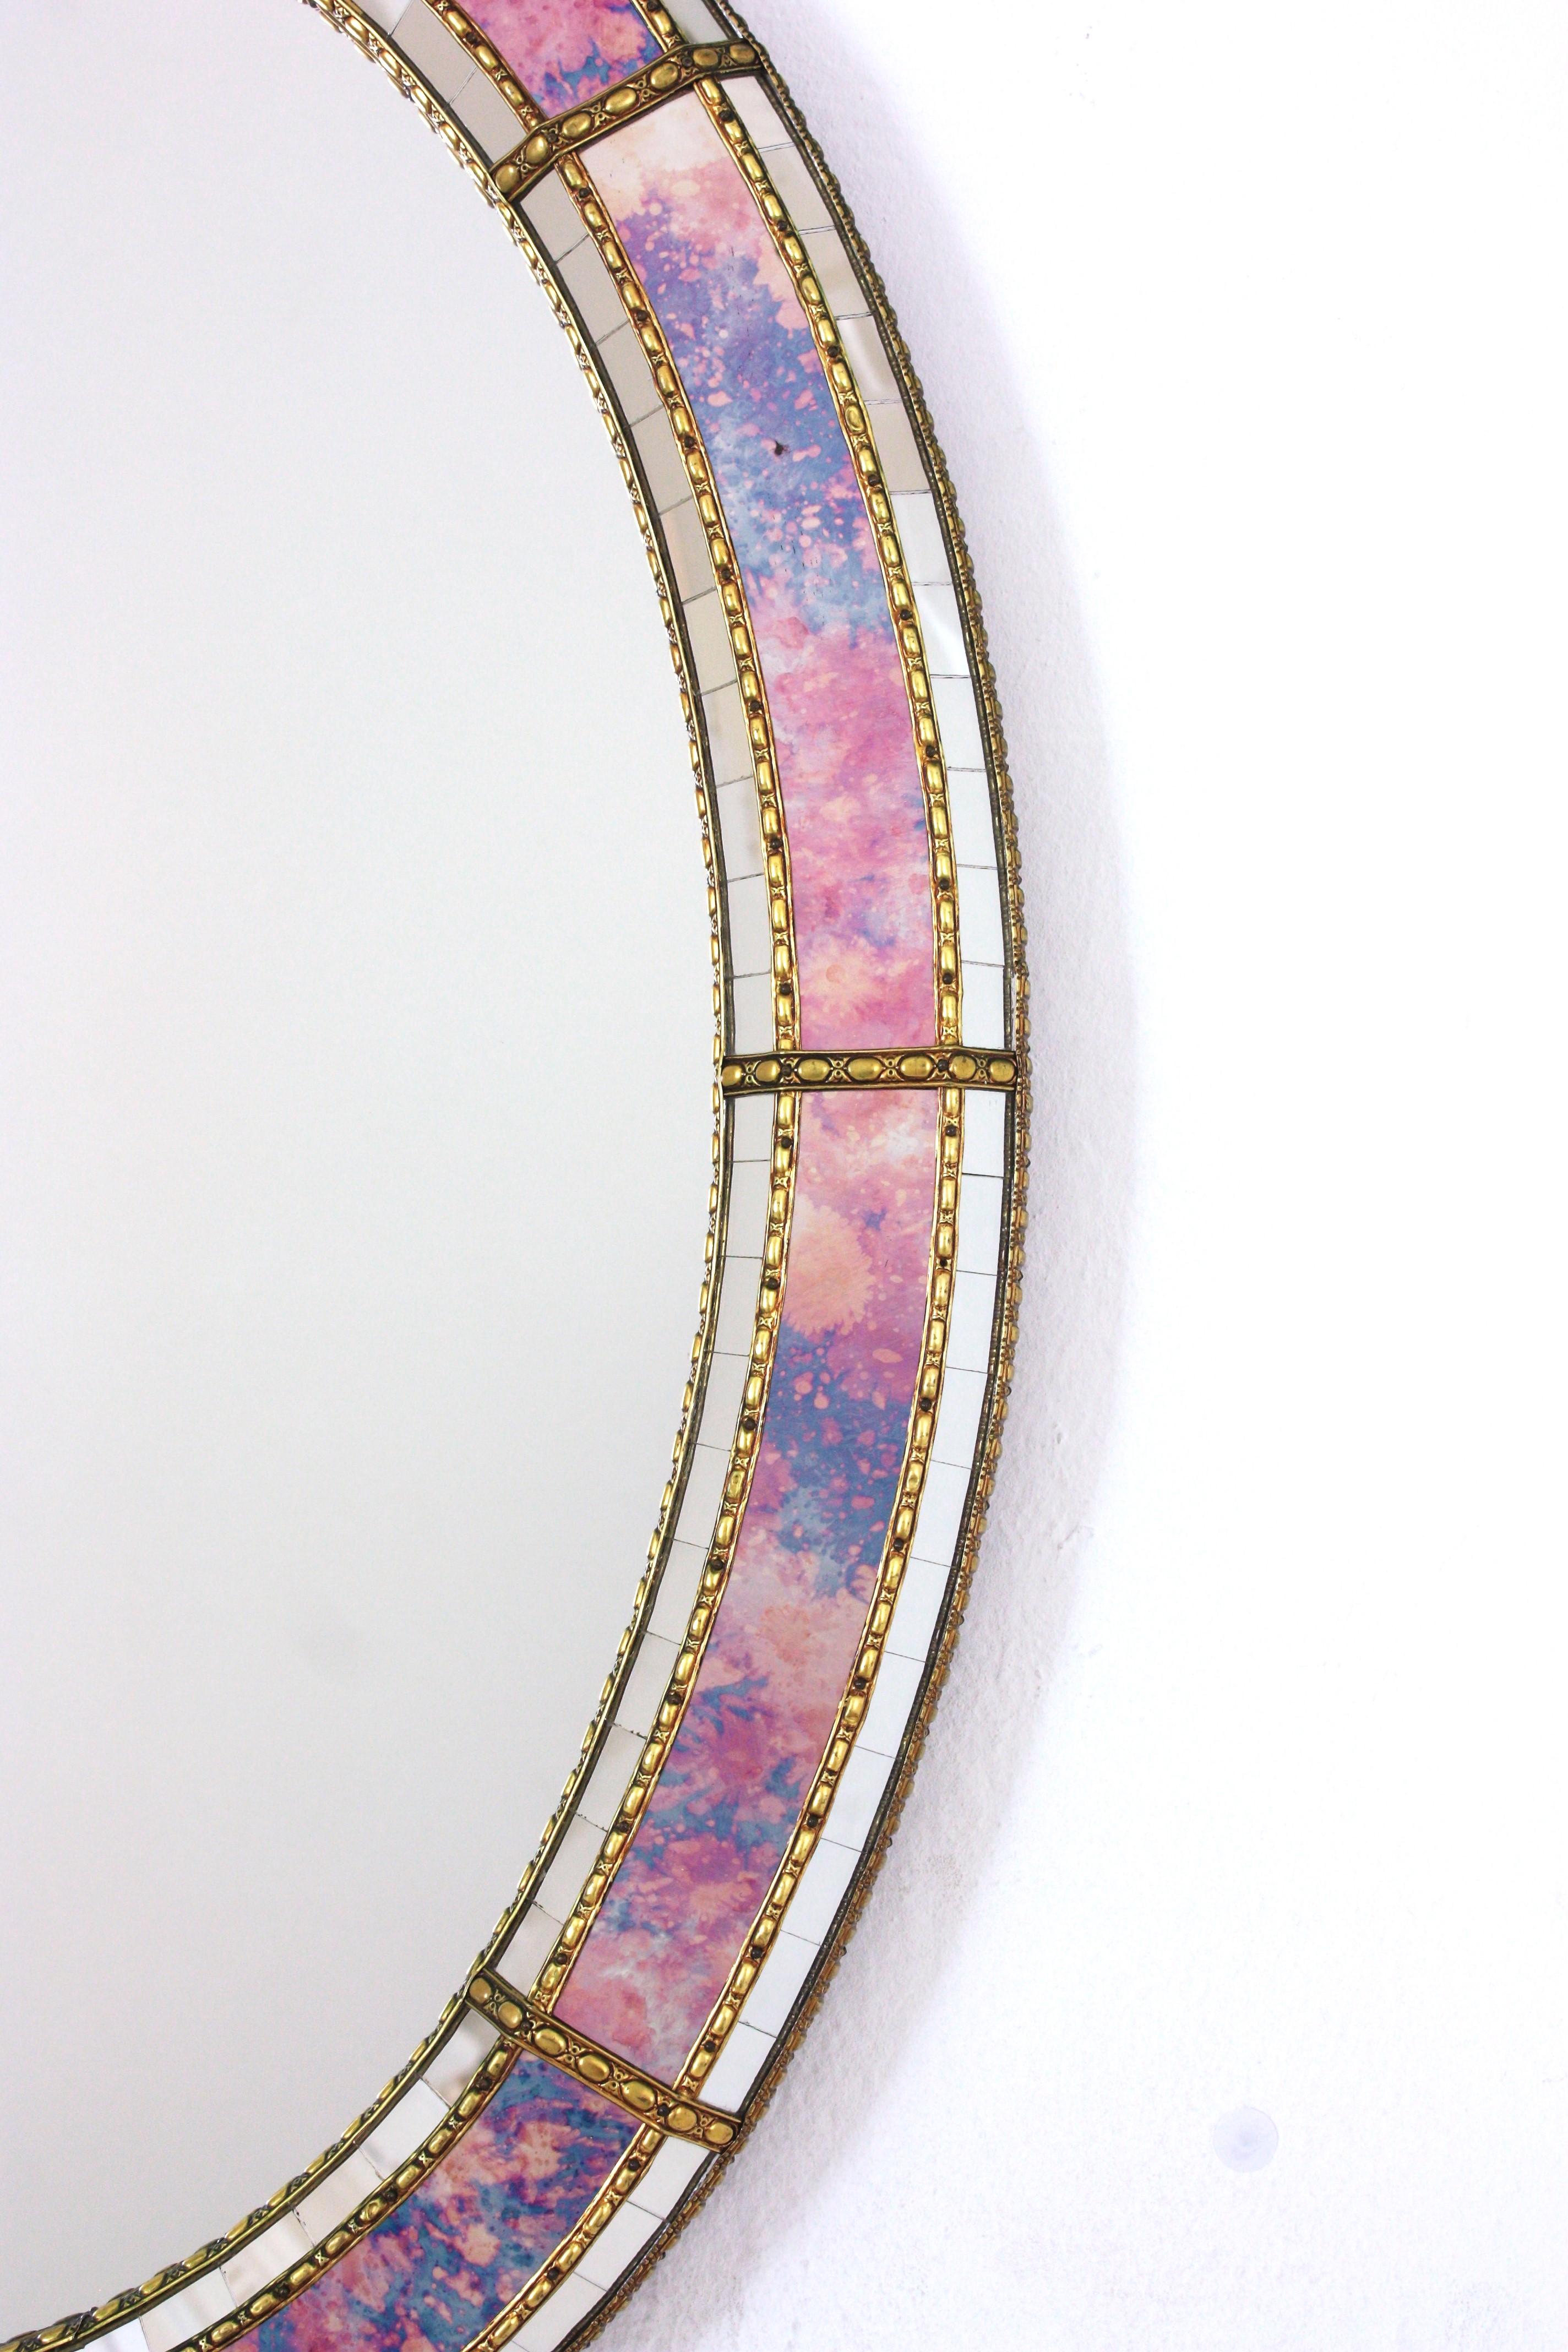 Oval Venetian Style Mirror with Pink Purple Glass and Brass Details 2